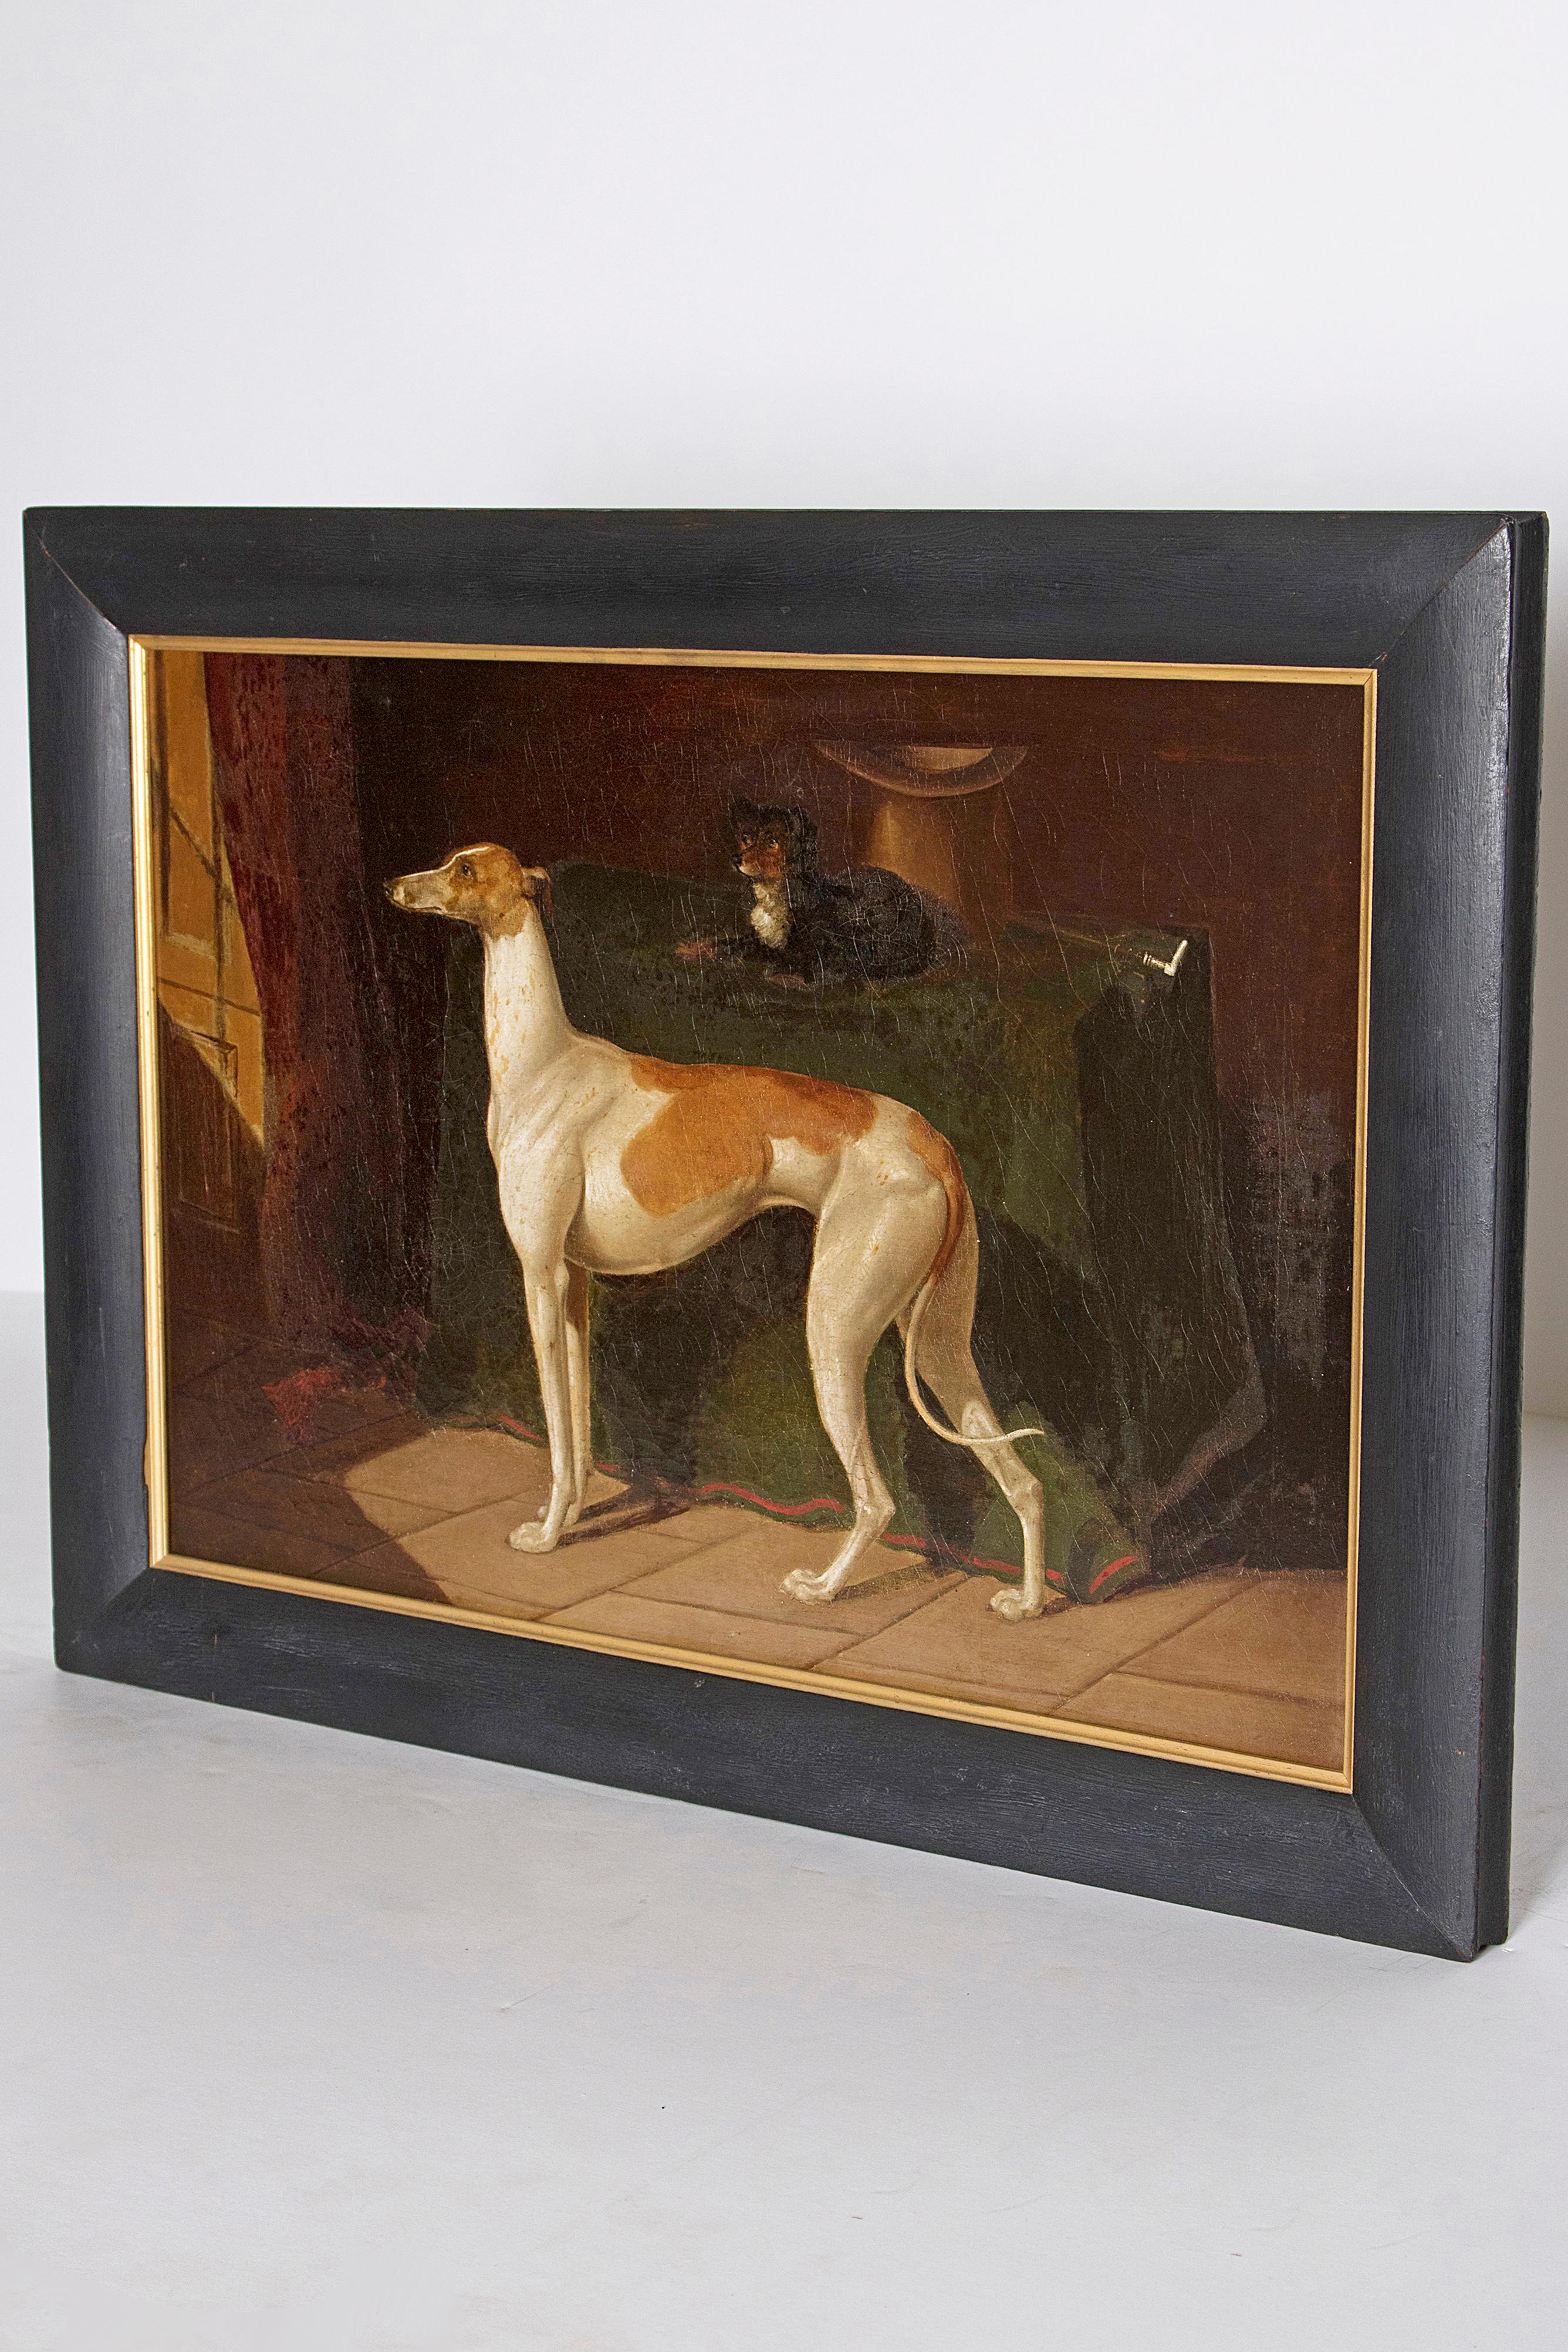 A realistically portrayed oil on canvas of a Whippet standing in an interior. The table top next to the Whippet has a small dog, top hat and cane. The painting has been relined, as found. 
Image measures: 15